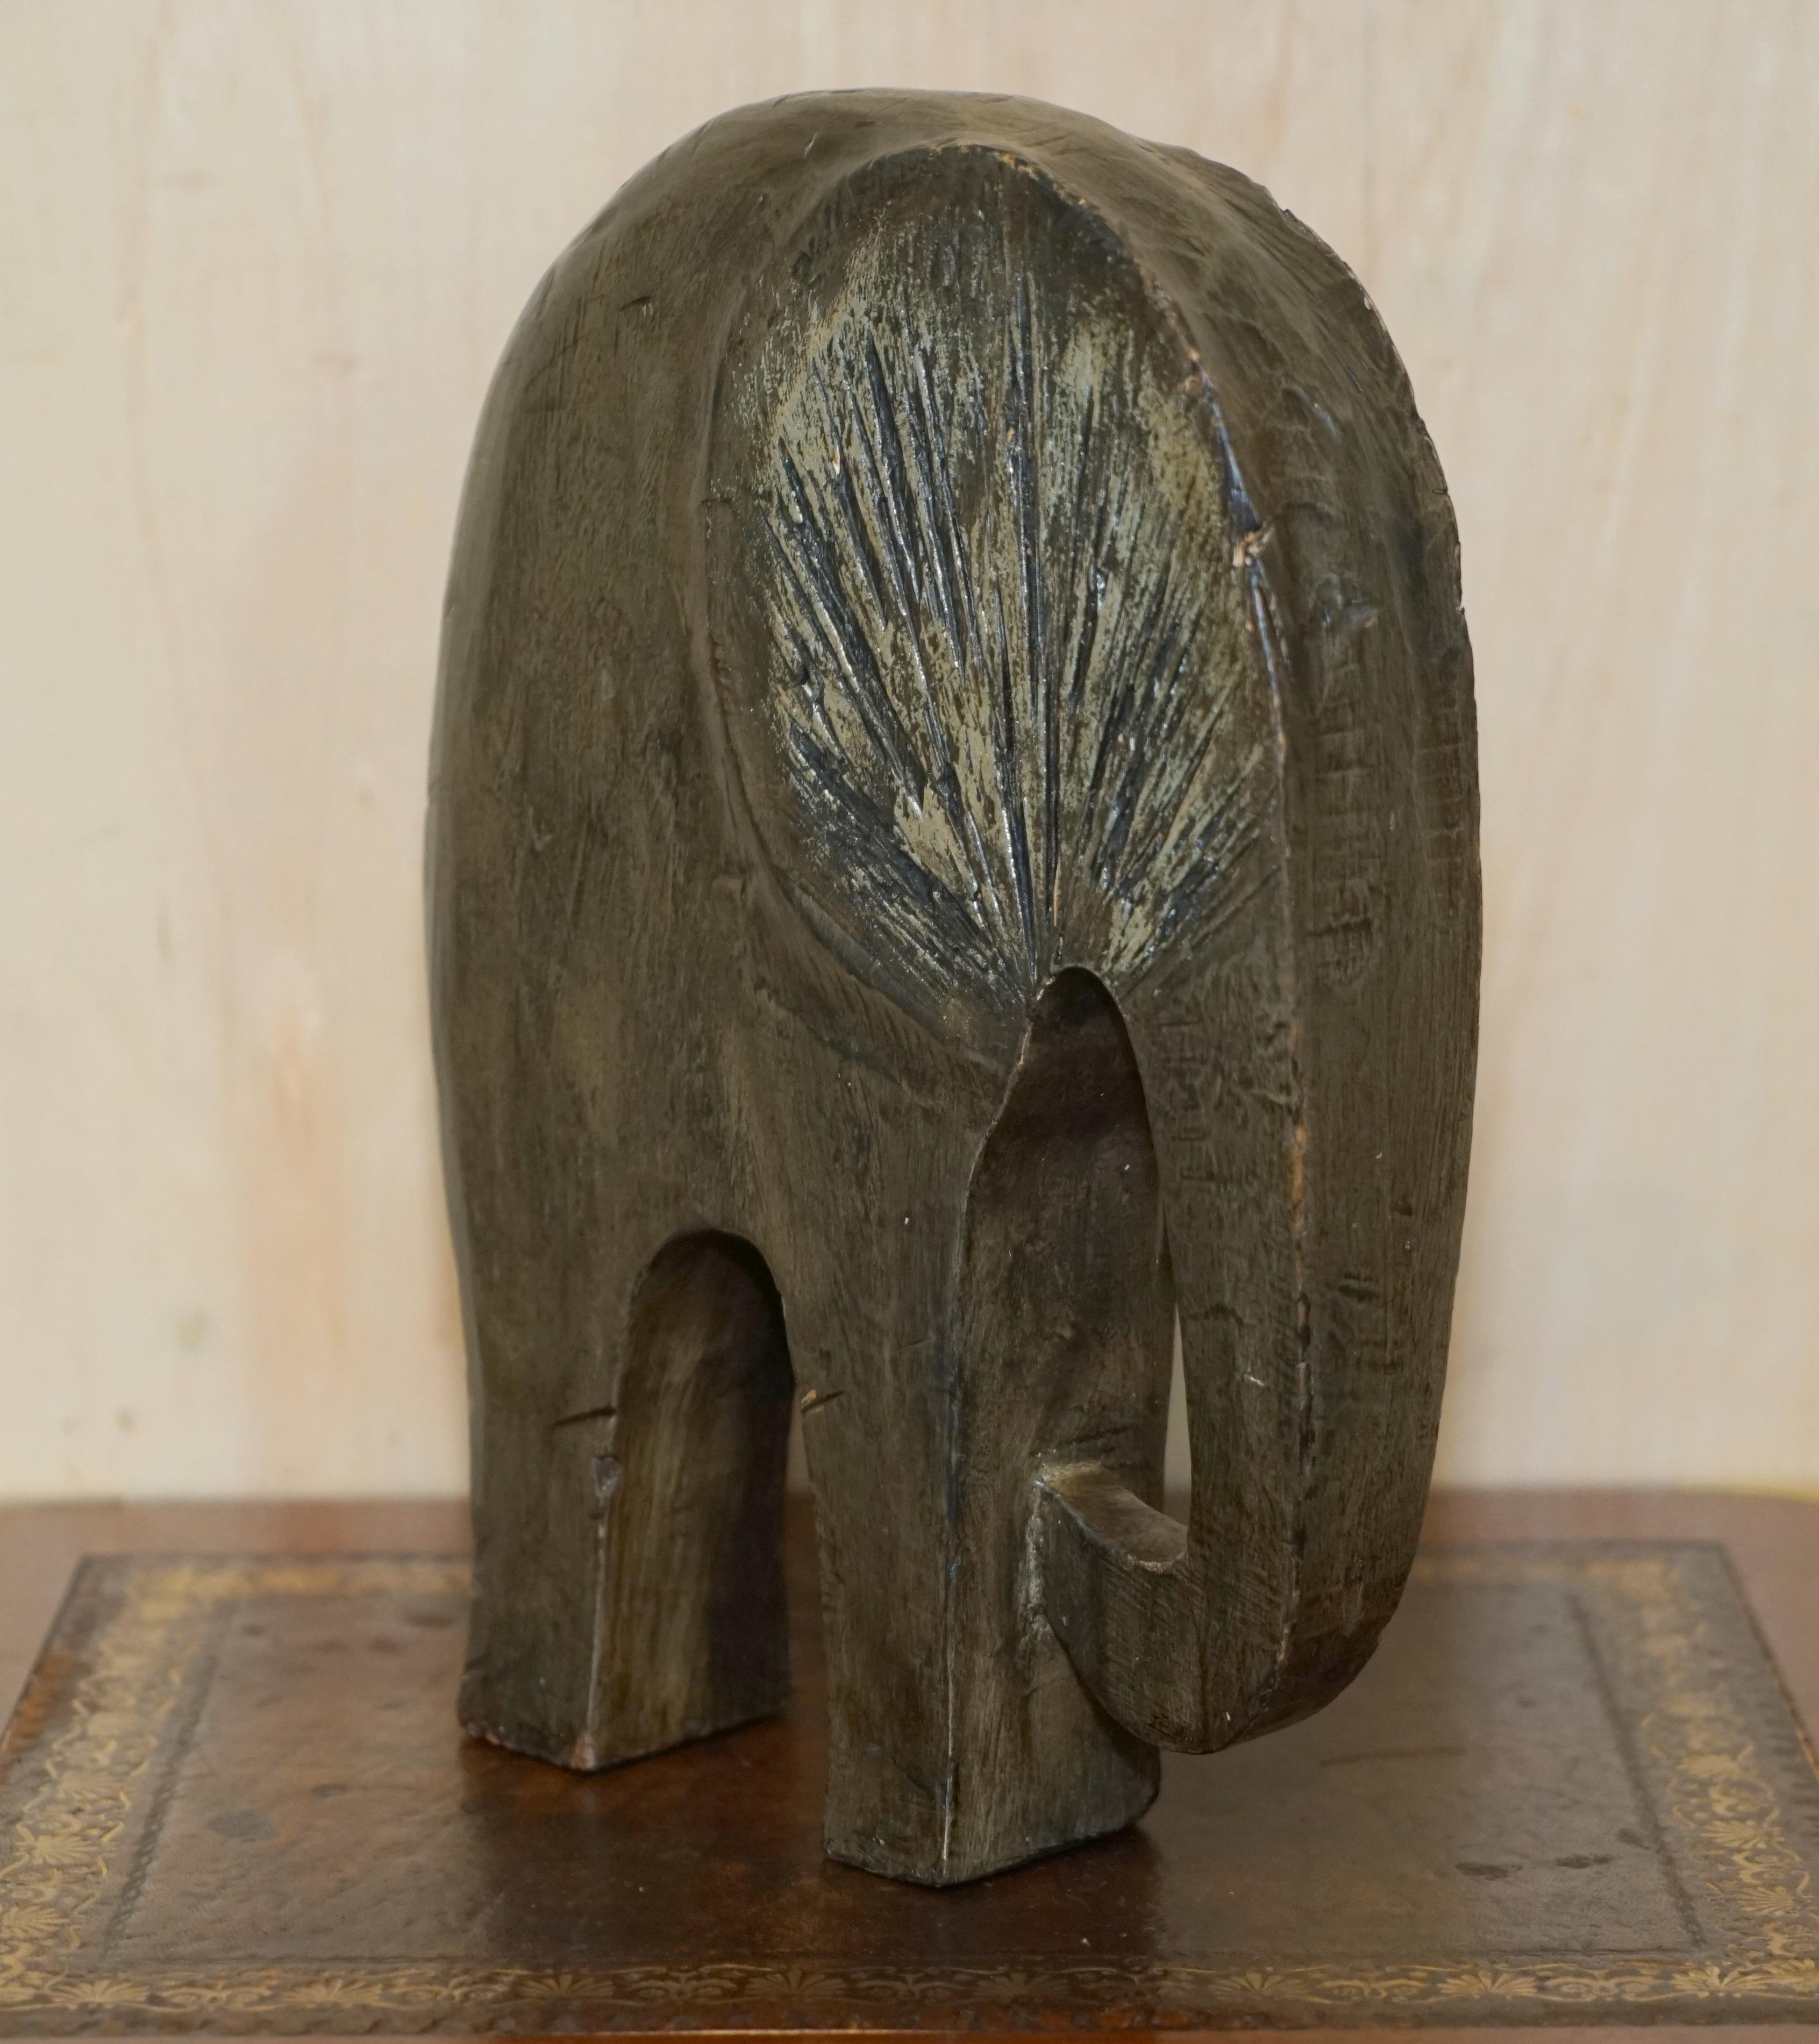 We are delighted to offer for sale this nice pair of vintage Modernist style elephants hand carved from solid piece of wood

A good looking and decorative pair of Modernist Elephants, they look stylish and cool in any setting 

Condition wise